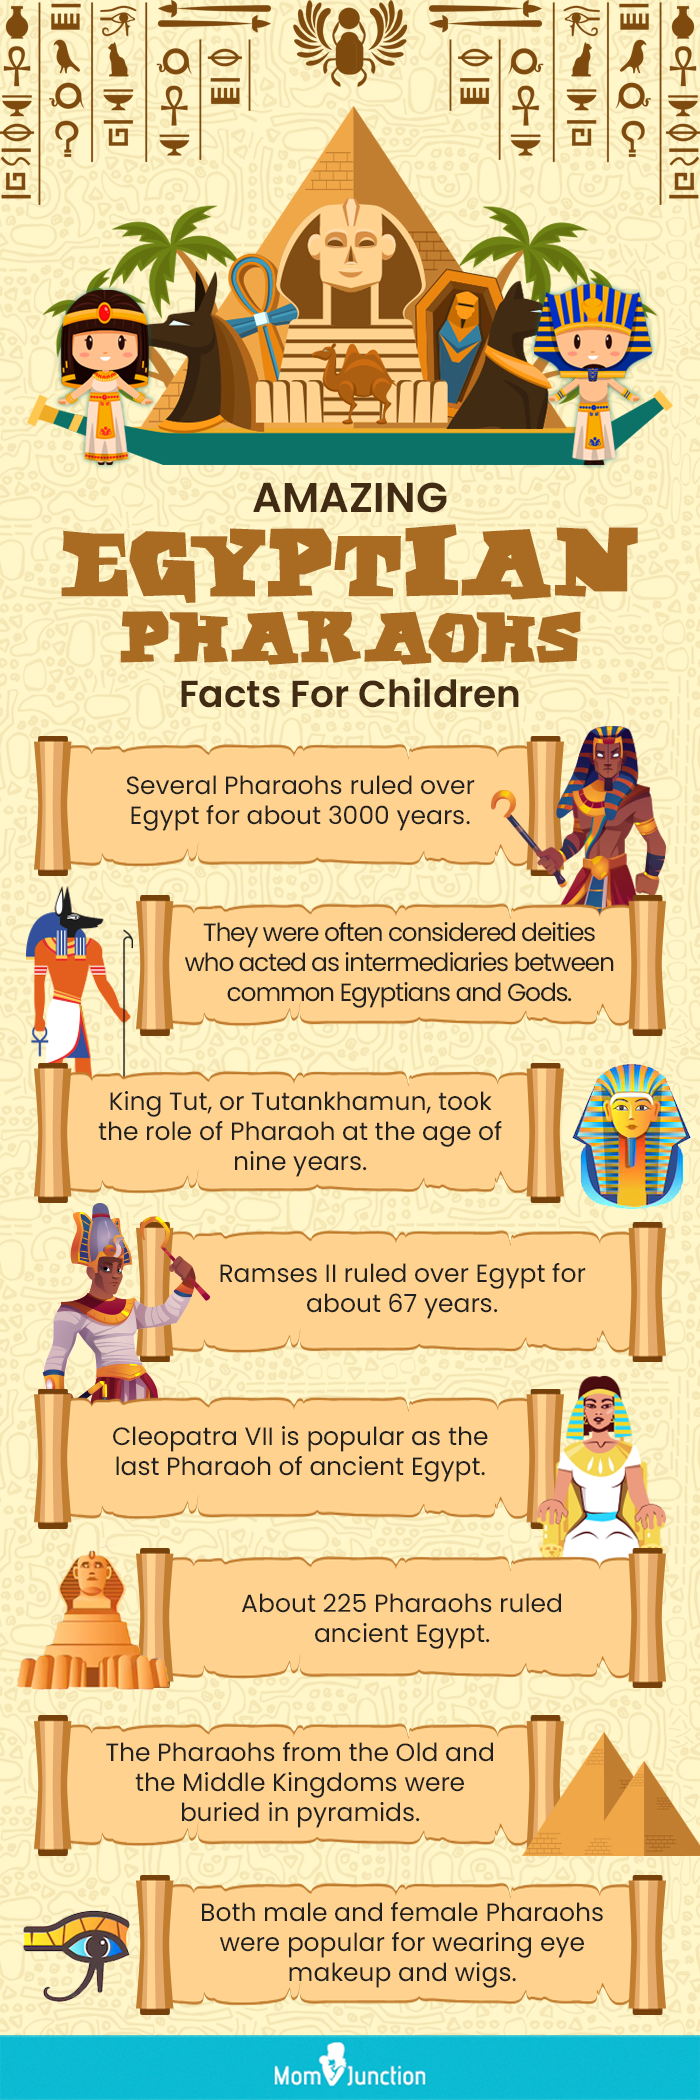 amazing egyptian pharaohs facts for children (infographic)